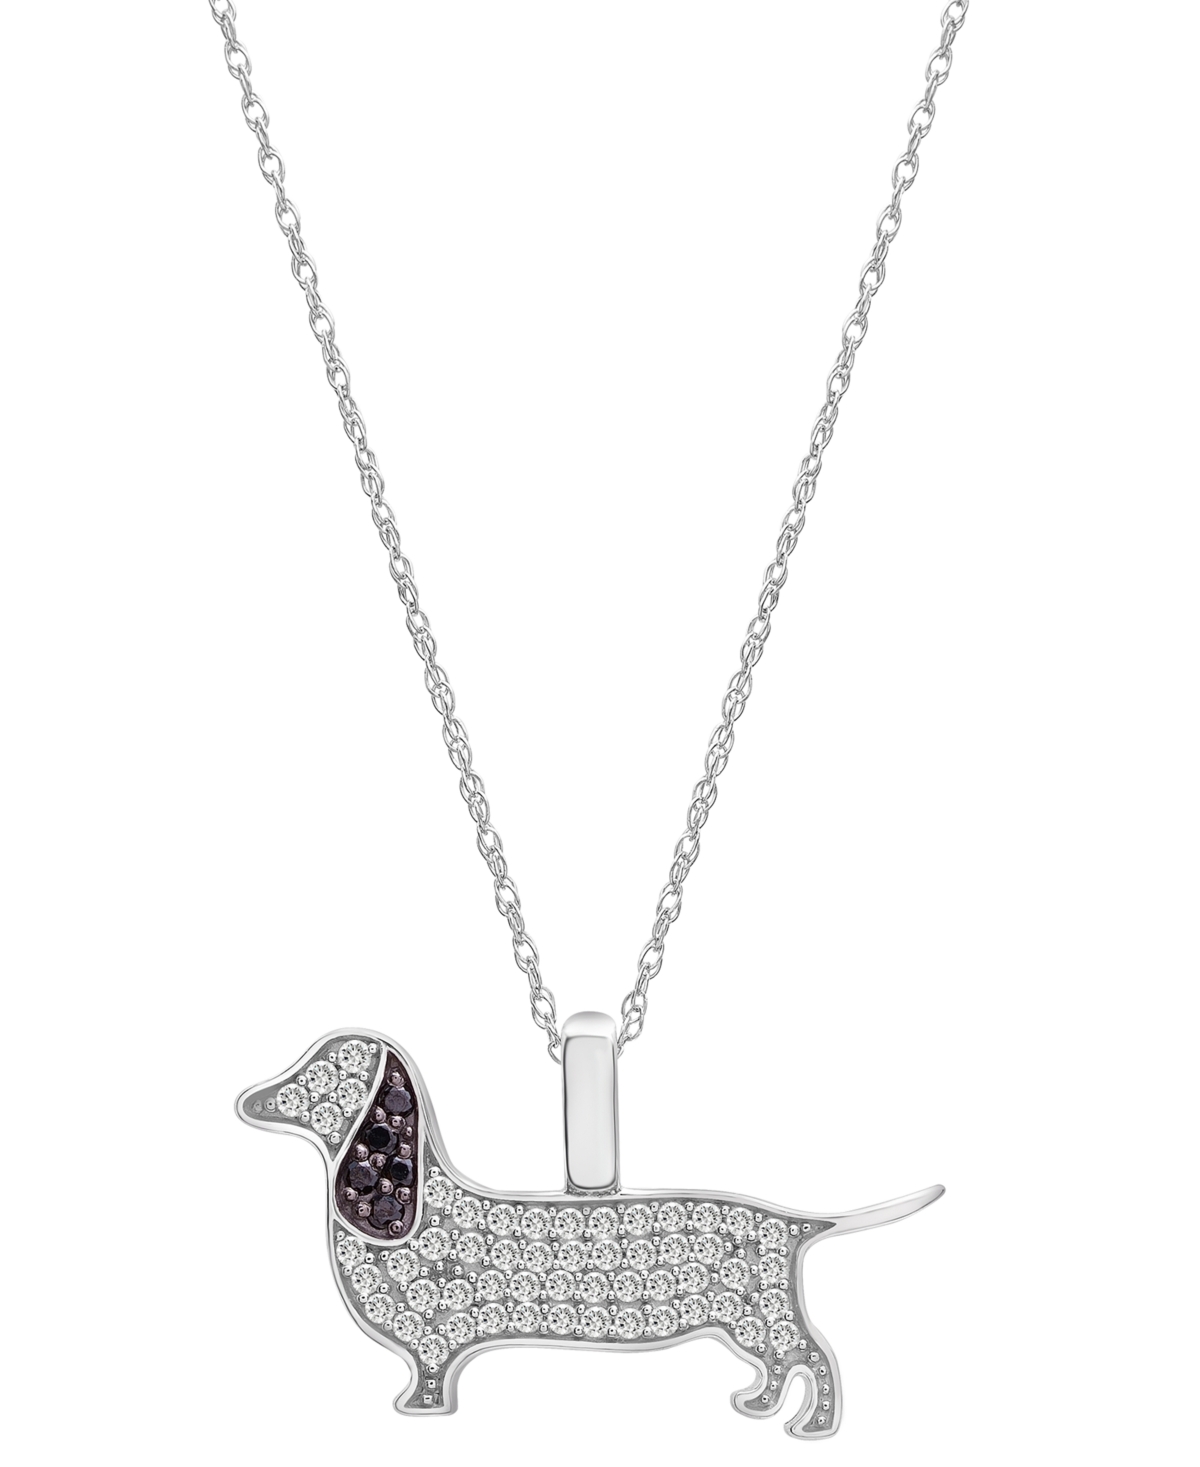 White Diamond (1/5 ct. t.w.) & Black Diamond (1/20 ct. t.w.) Dachshund Pendant Necklace in 10k White Gold, 16" + 2" extender, Created for Macy